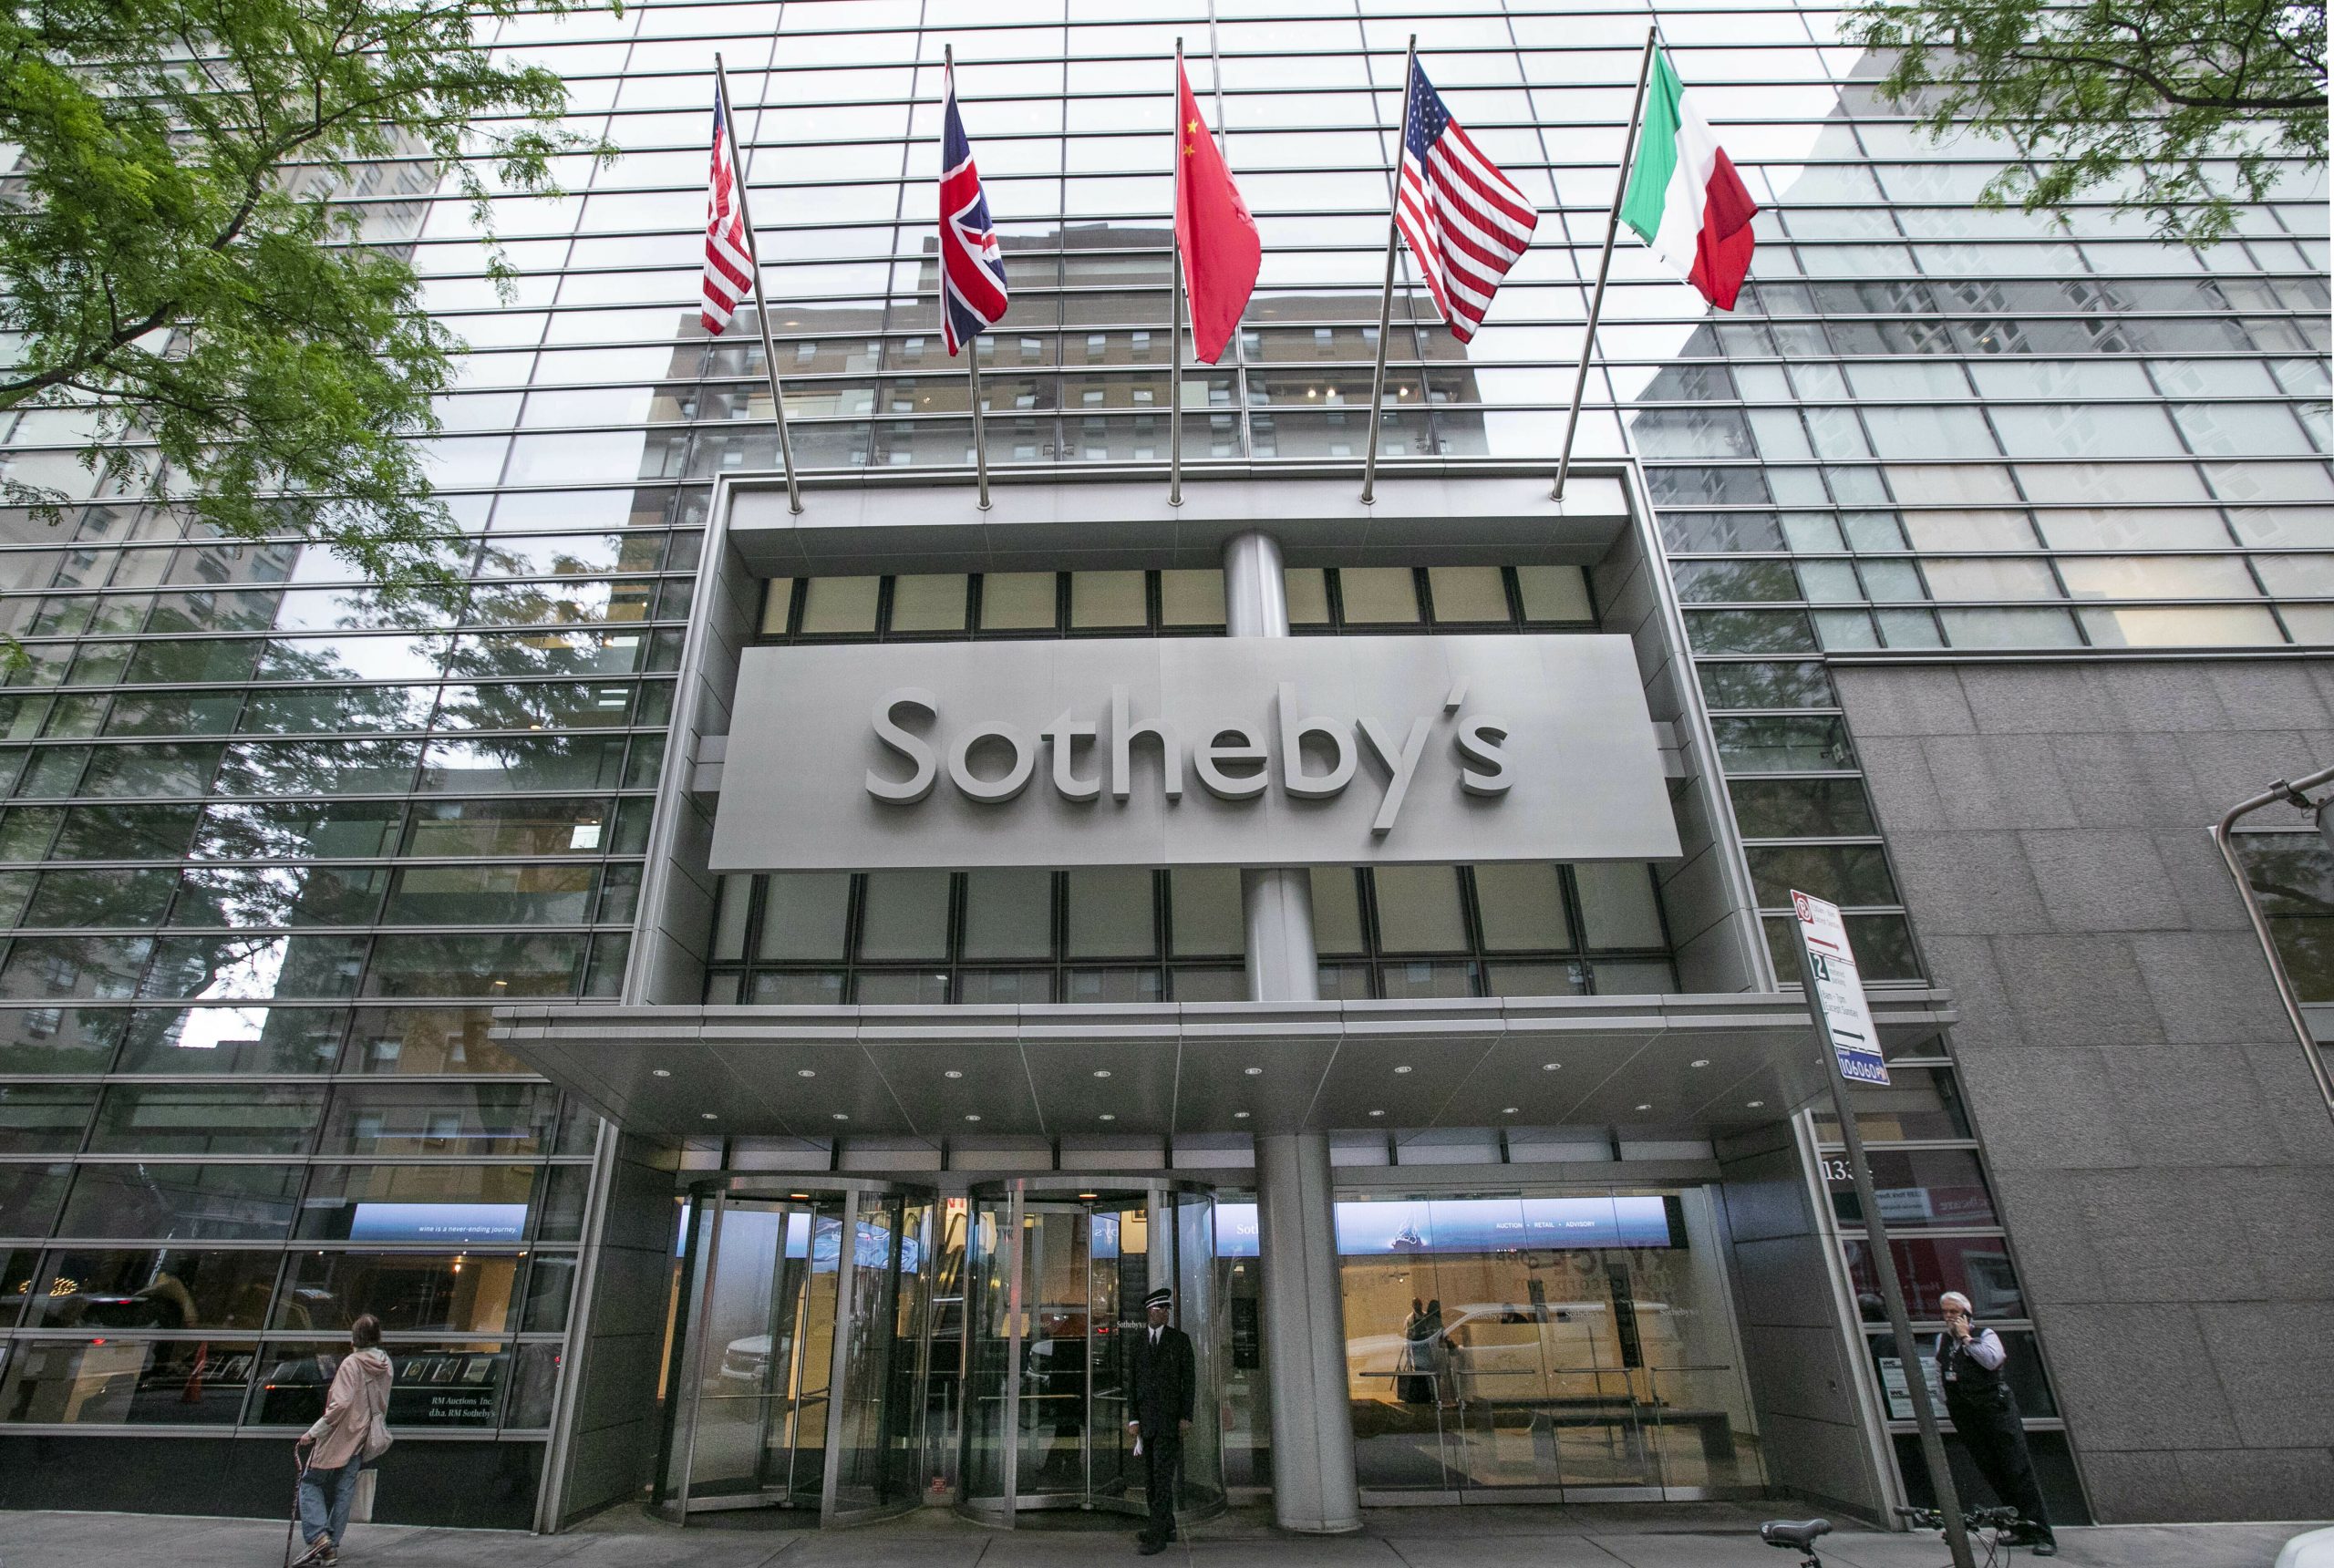 New York: Sotheby’s helped wealthy art lovers avoid taxes